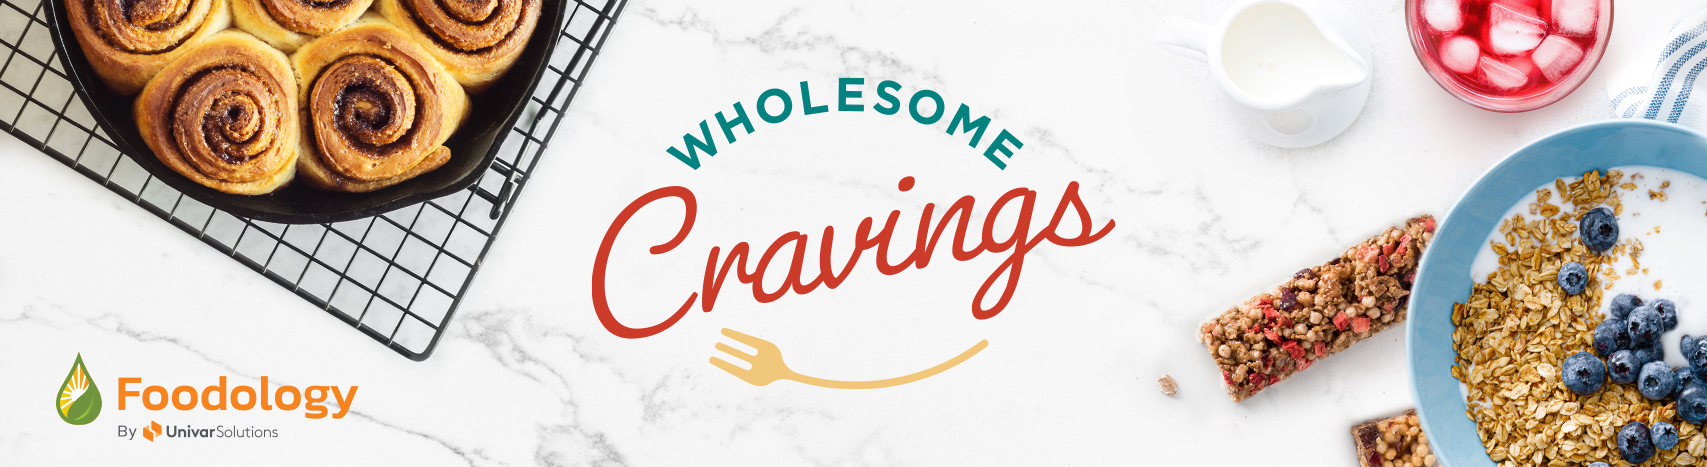 Healthier food and beverages on a marble tabletop with the Wholesome Cravings logo